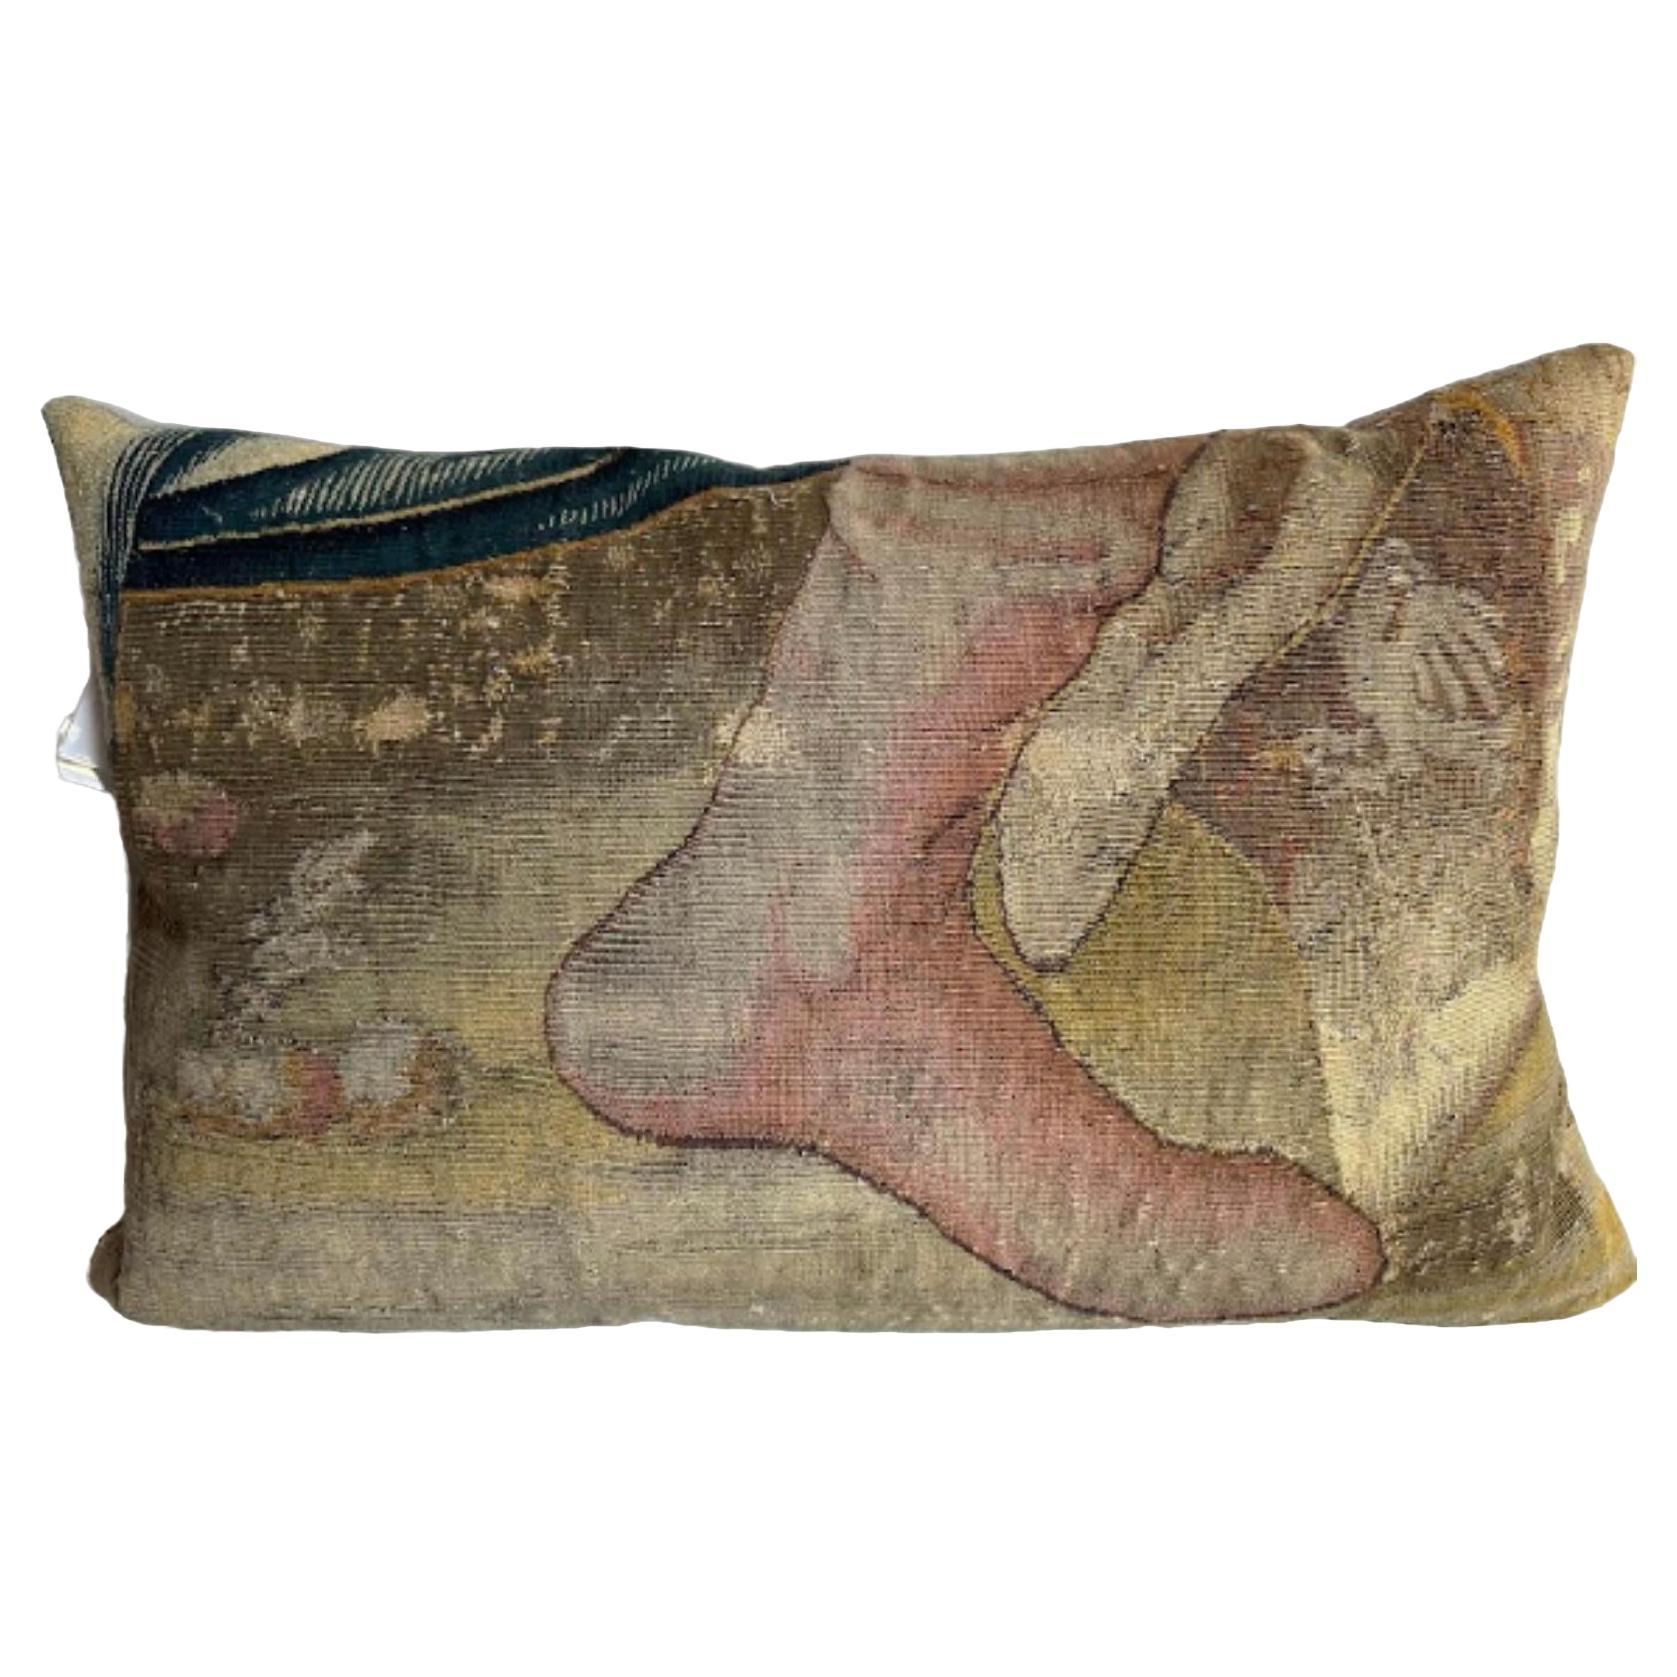 Brussel 16th Century Pillow - 26" X 16" For Sale